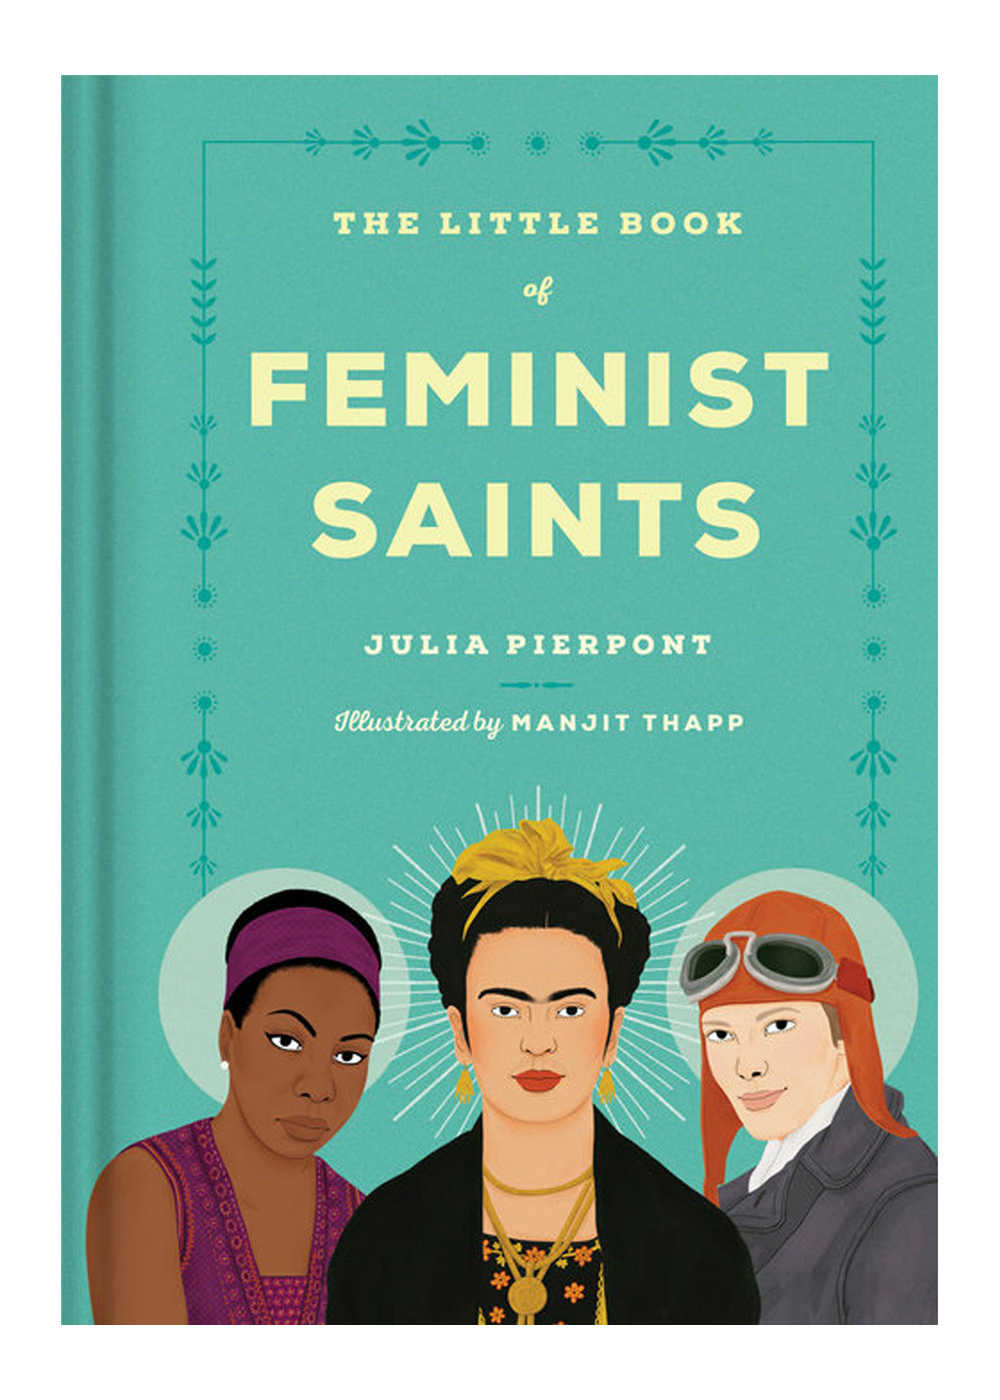 make-2018-your-year-with-these-books-little-book-of-feminist-saints